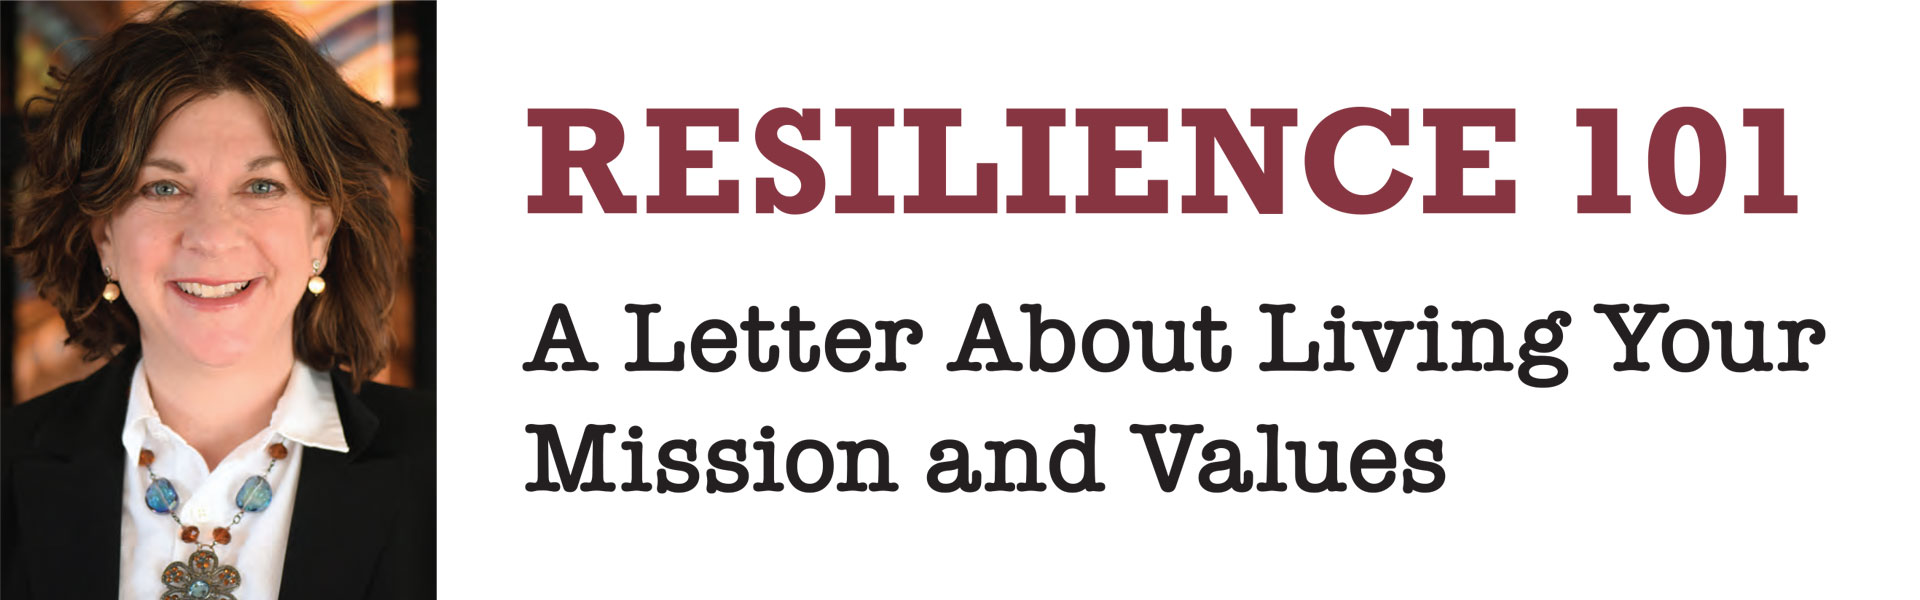 Resilience 101: A Letter About Living Your Mission and Values